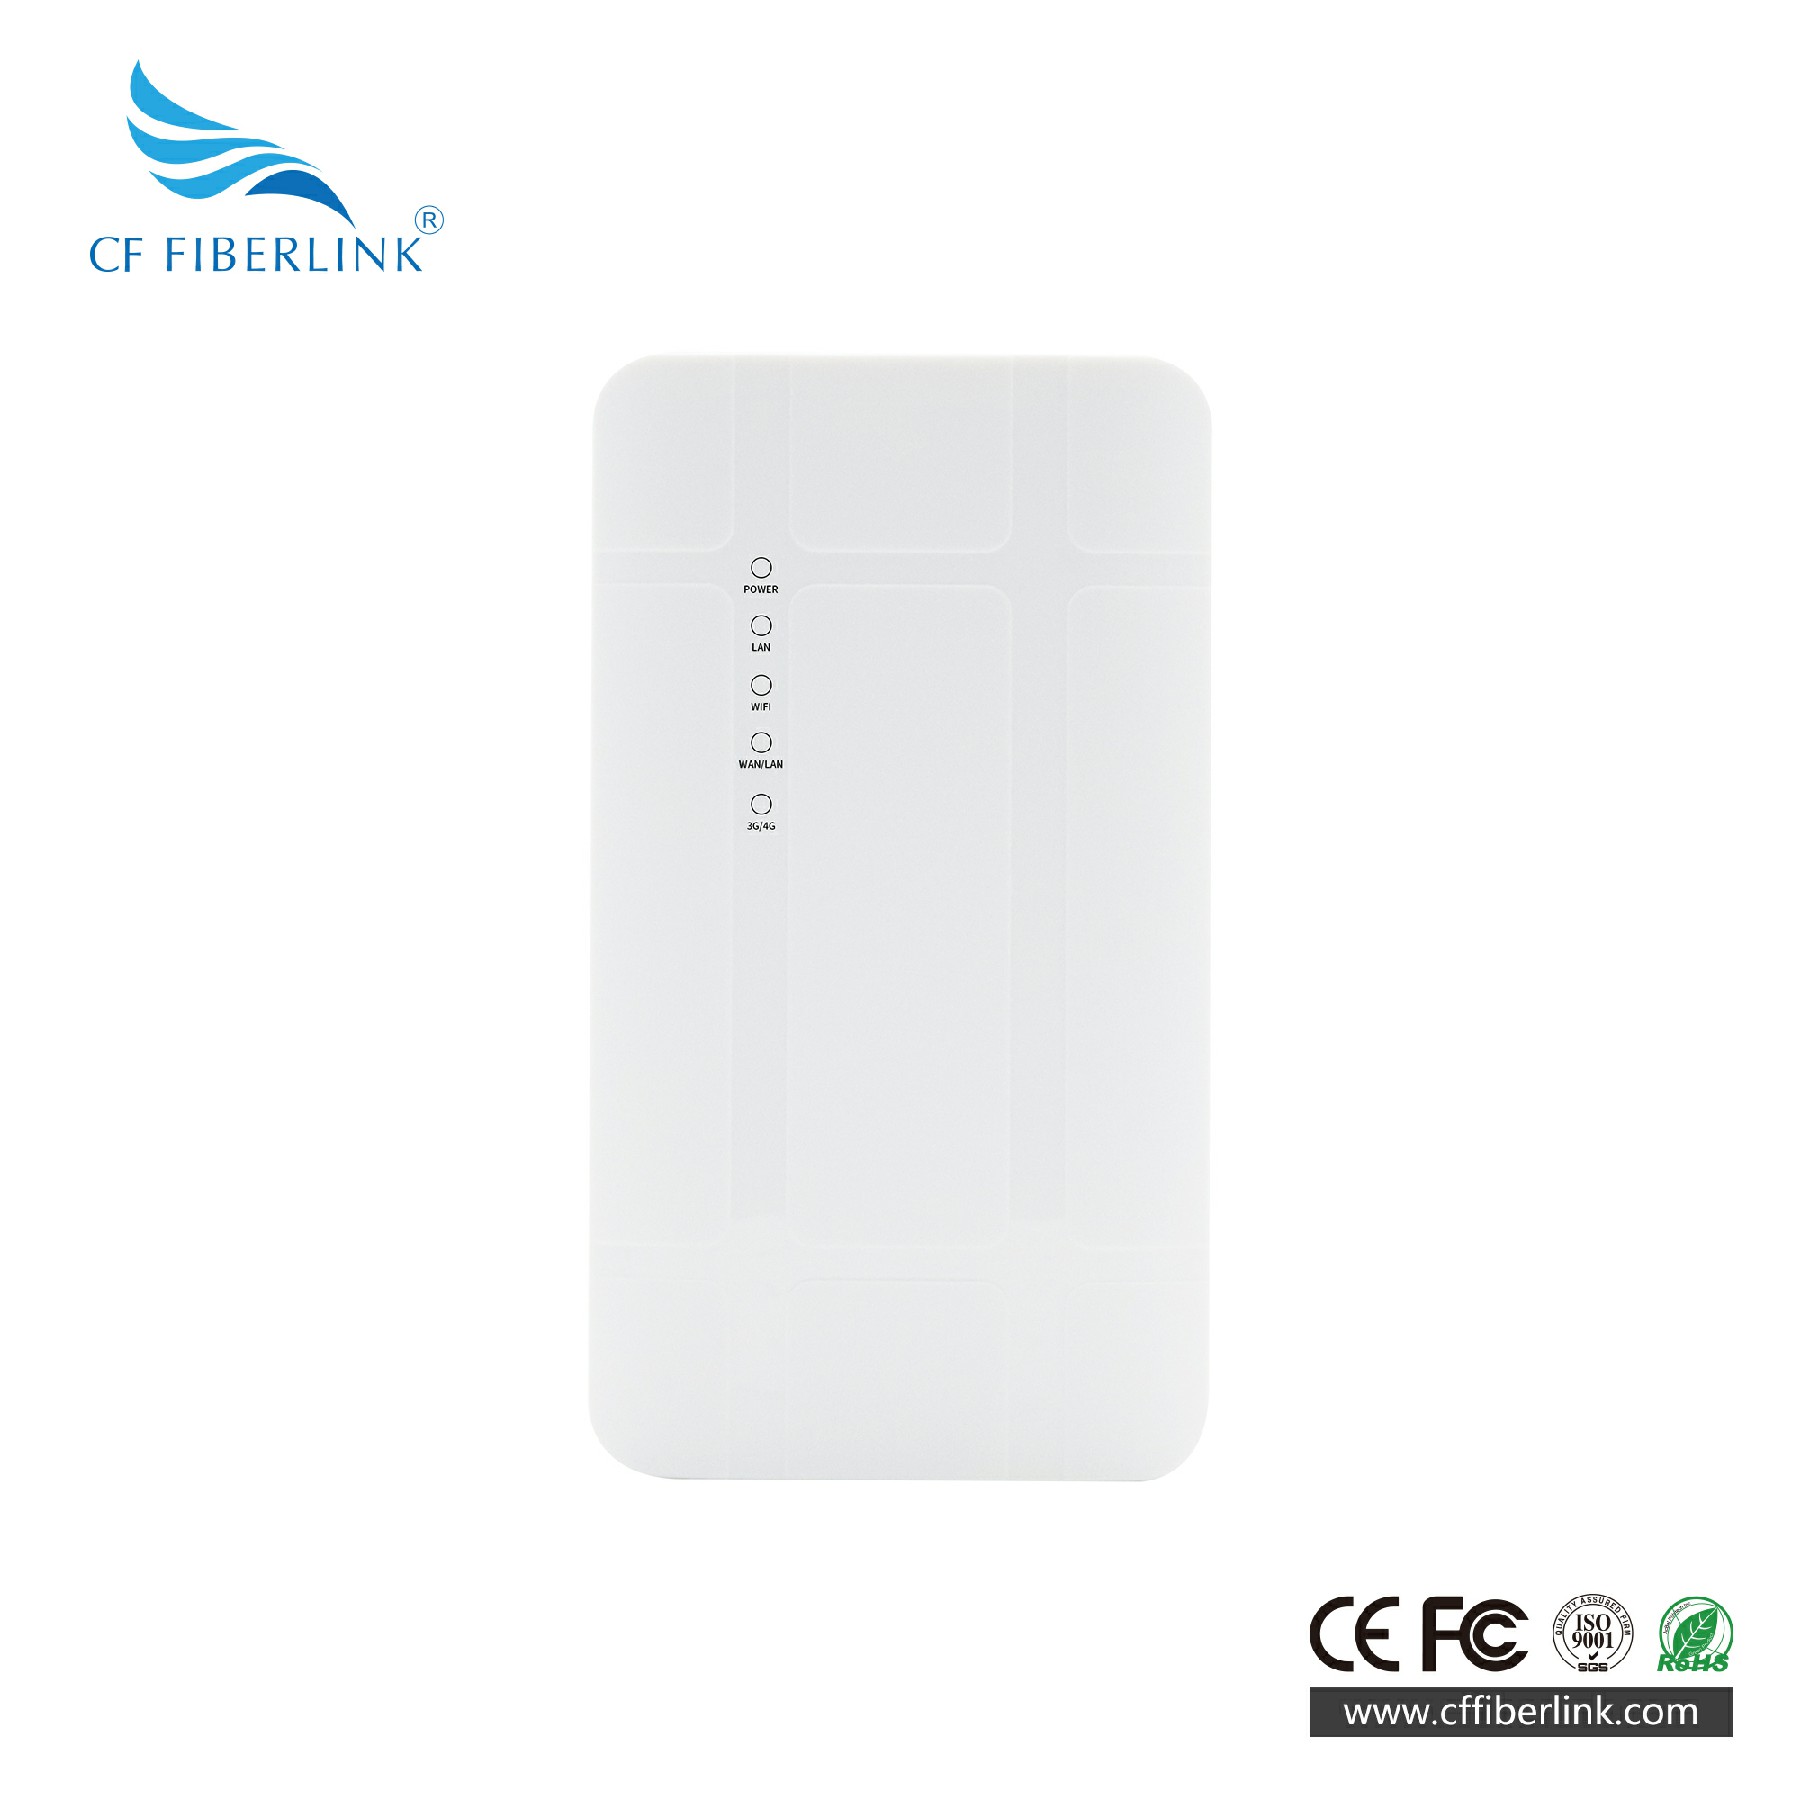 4G Outdoor wireless router